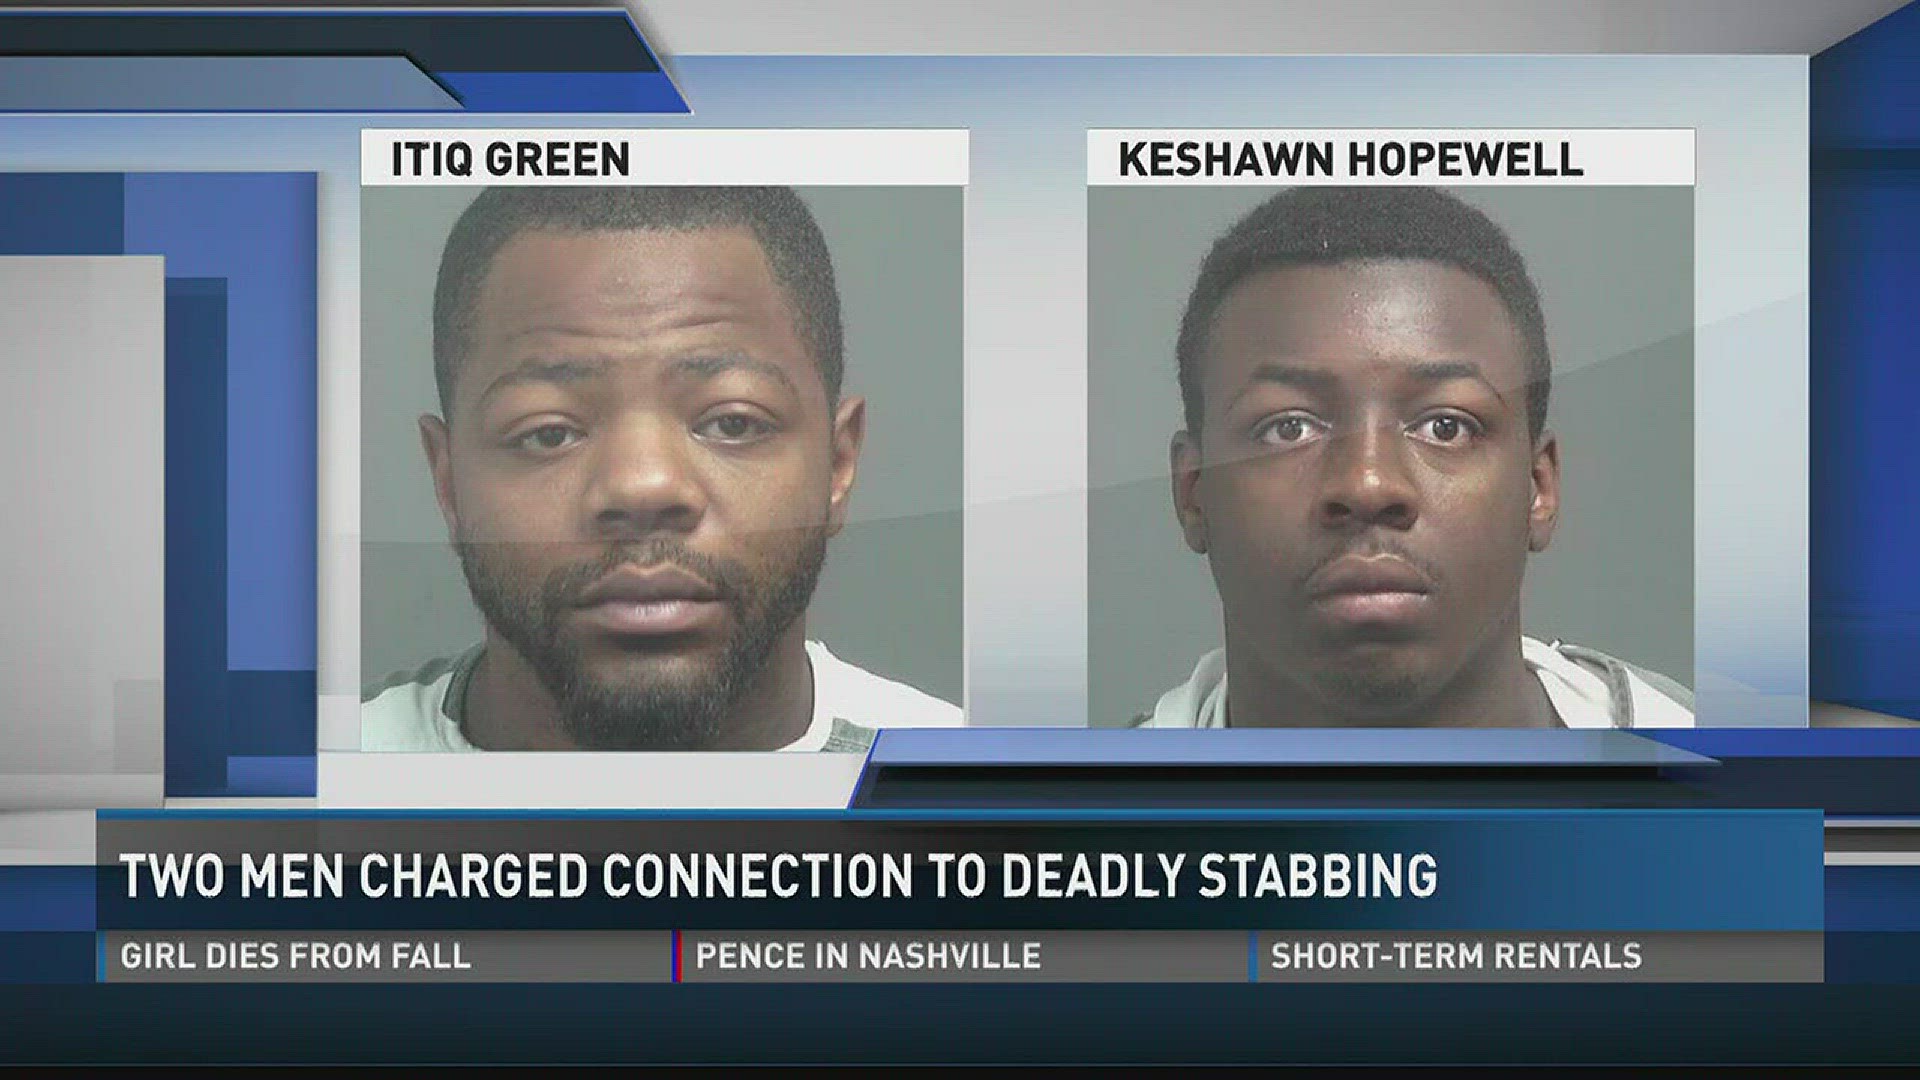 Aug. 3, 2017: Two men are in custody in connection to the stabbing death of an 18-year-old man.